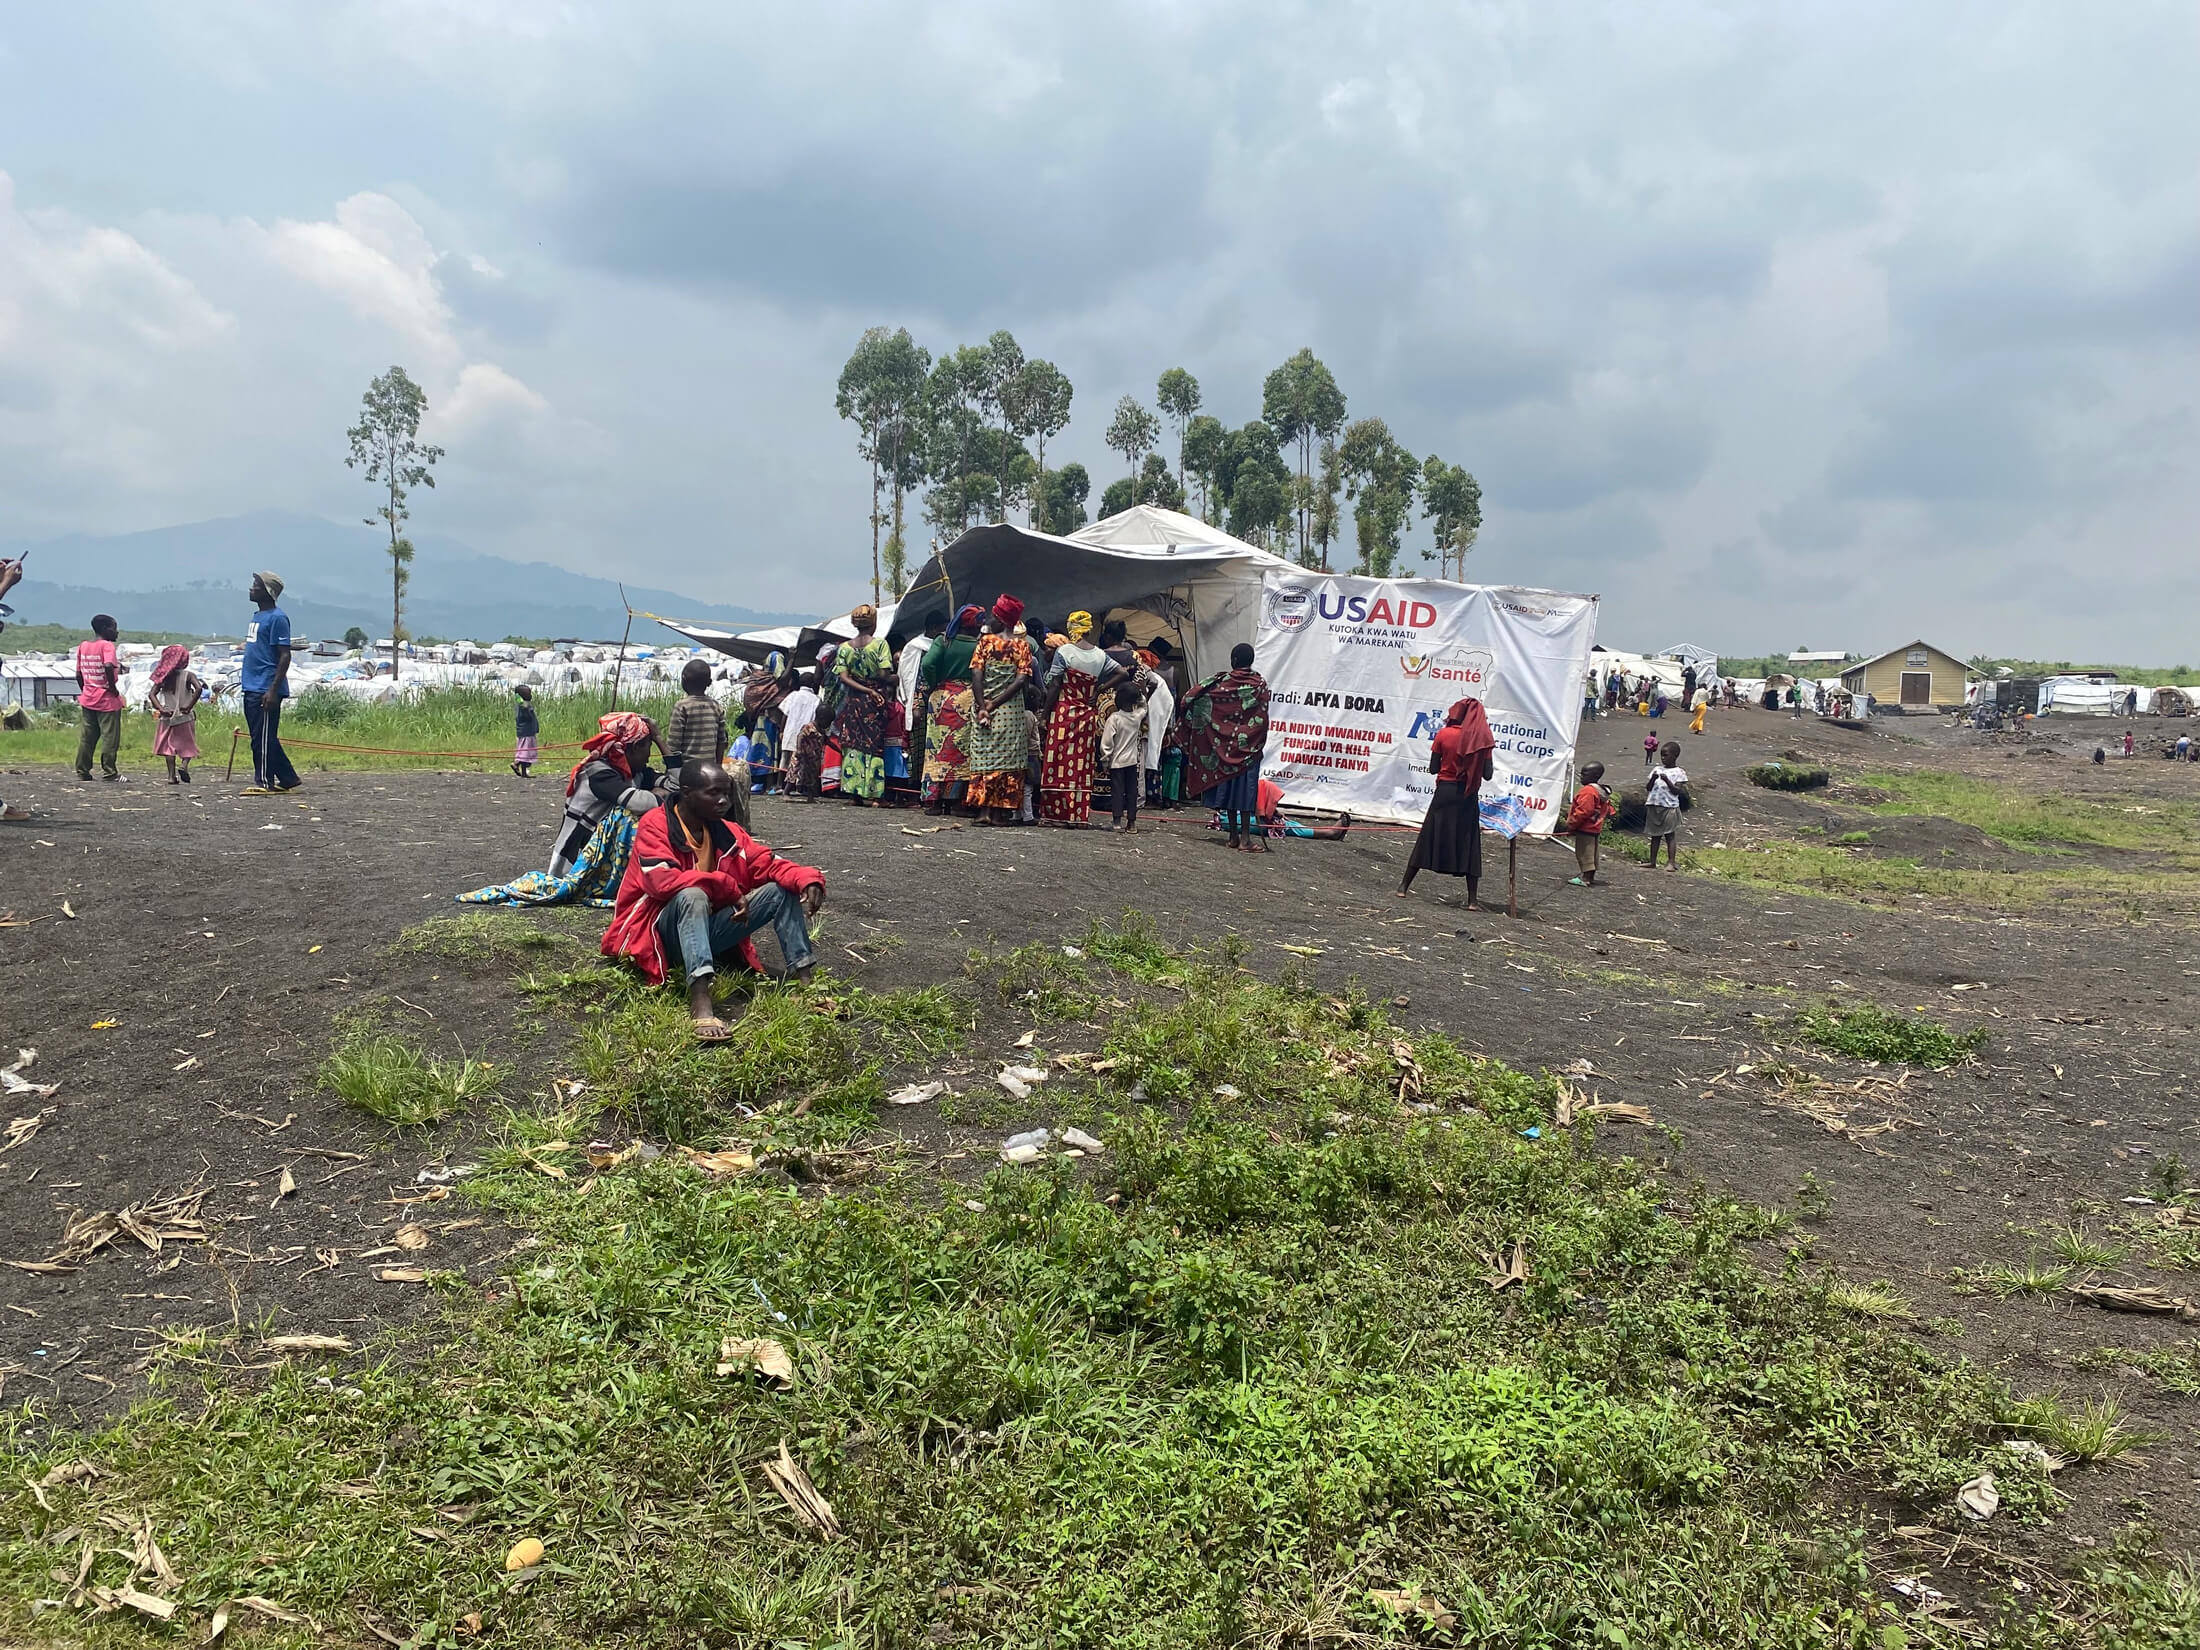 International Medical Corps staff set up a mobile medical clinic in Kirotshe health zone.